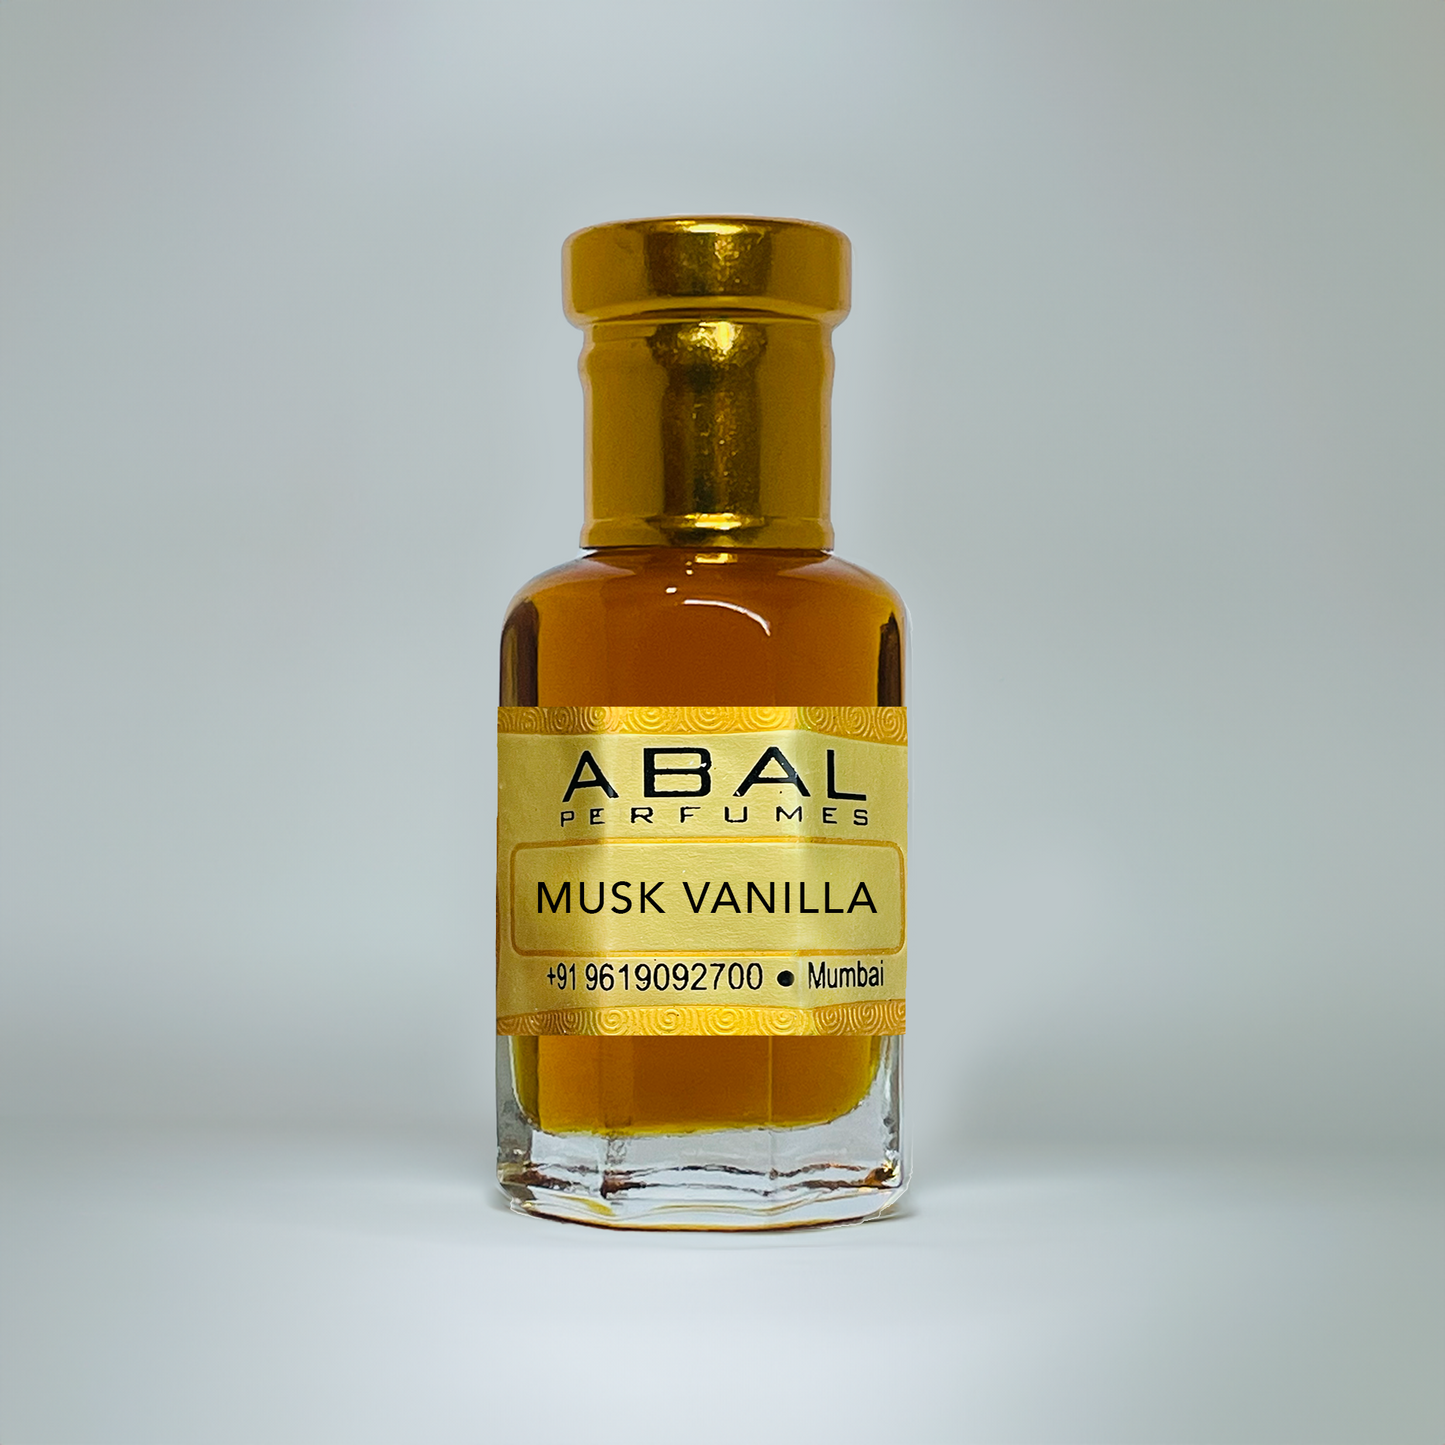 TIMELESS Vanilla Musk Attar, sweet, earthy and sensual fragrance – TIMELESS  Essential Oils